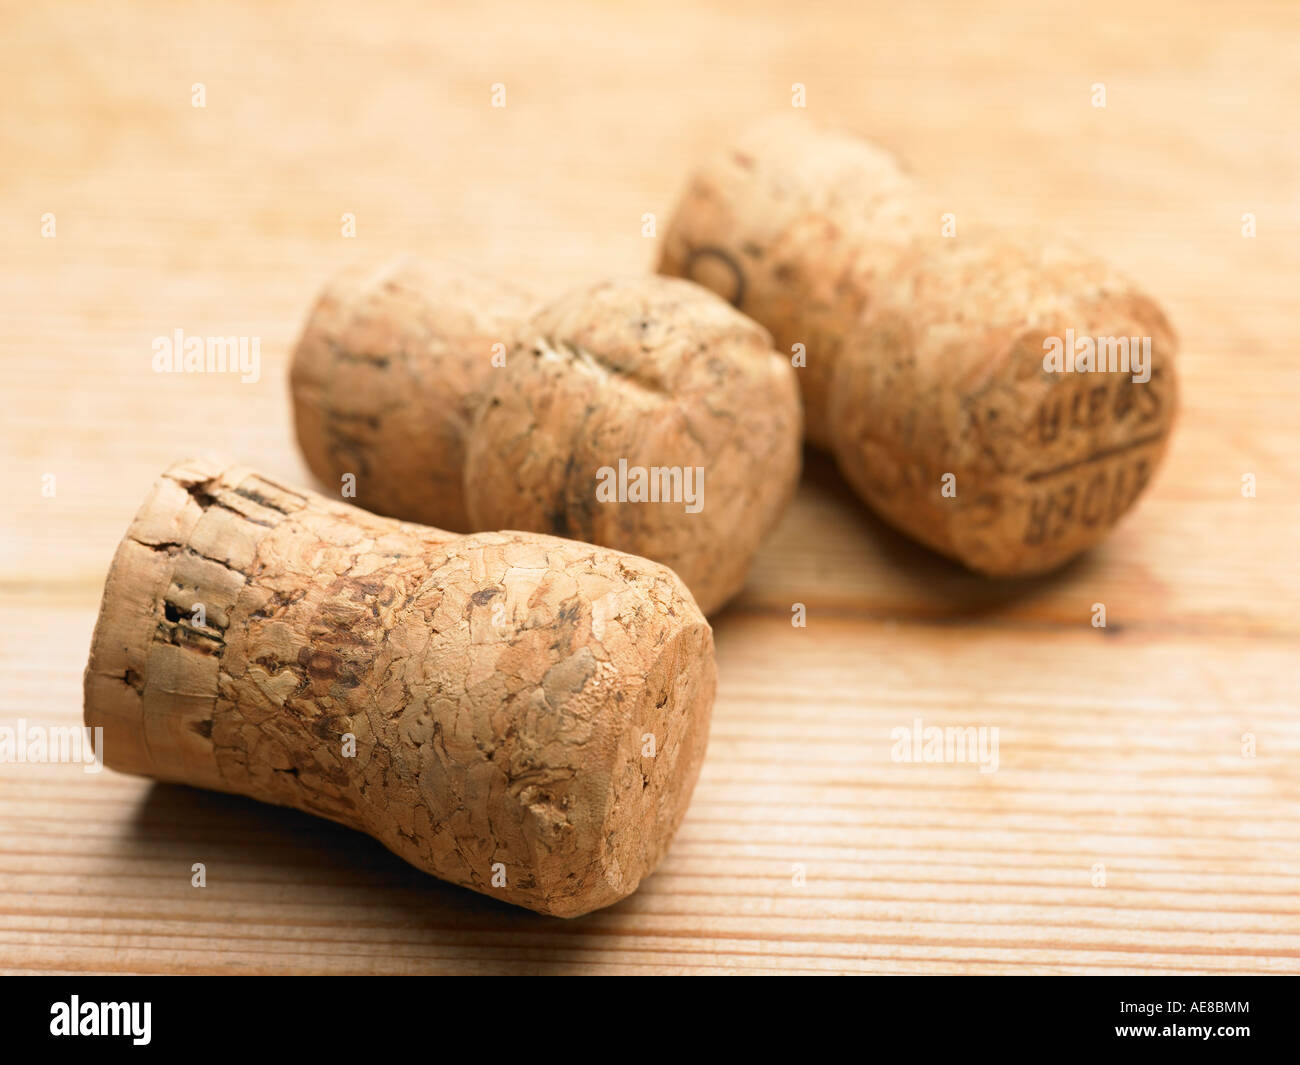 selection champagne cork stoppers Stock Photo